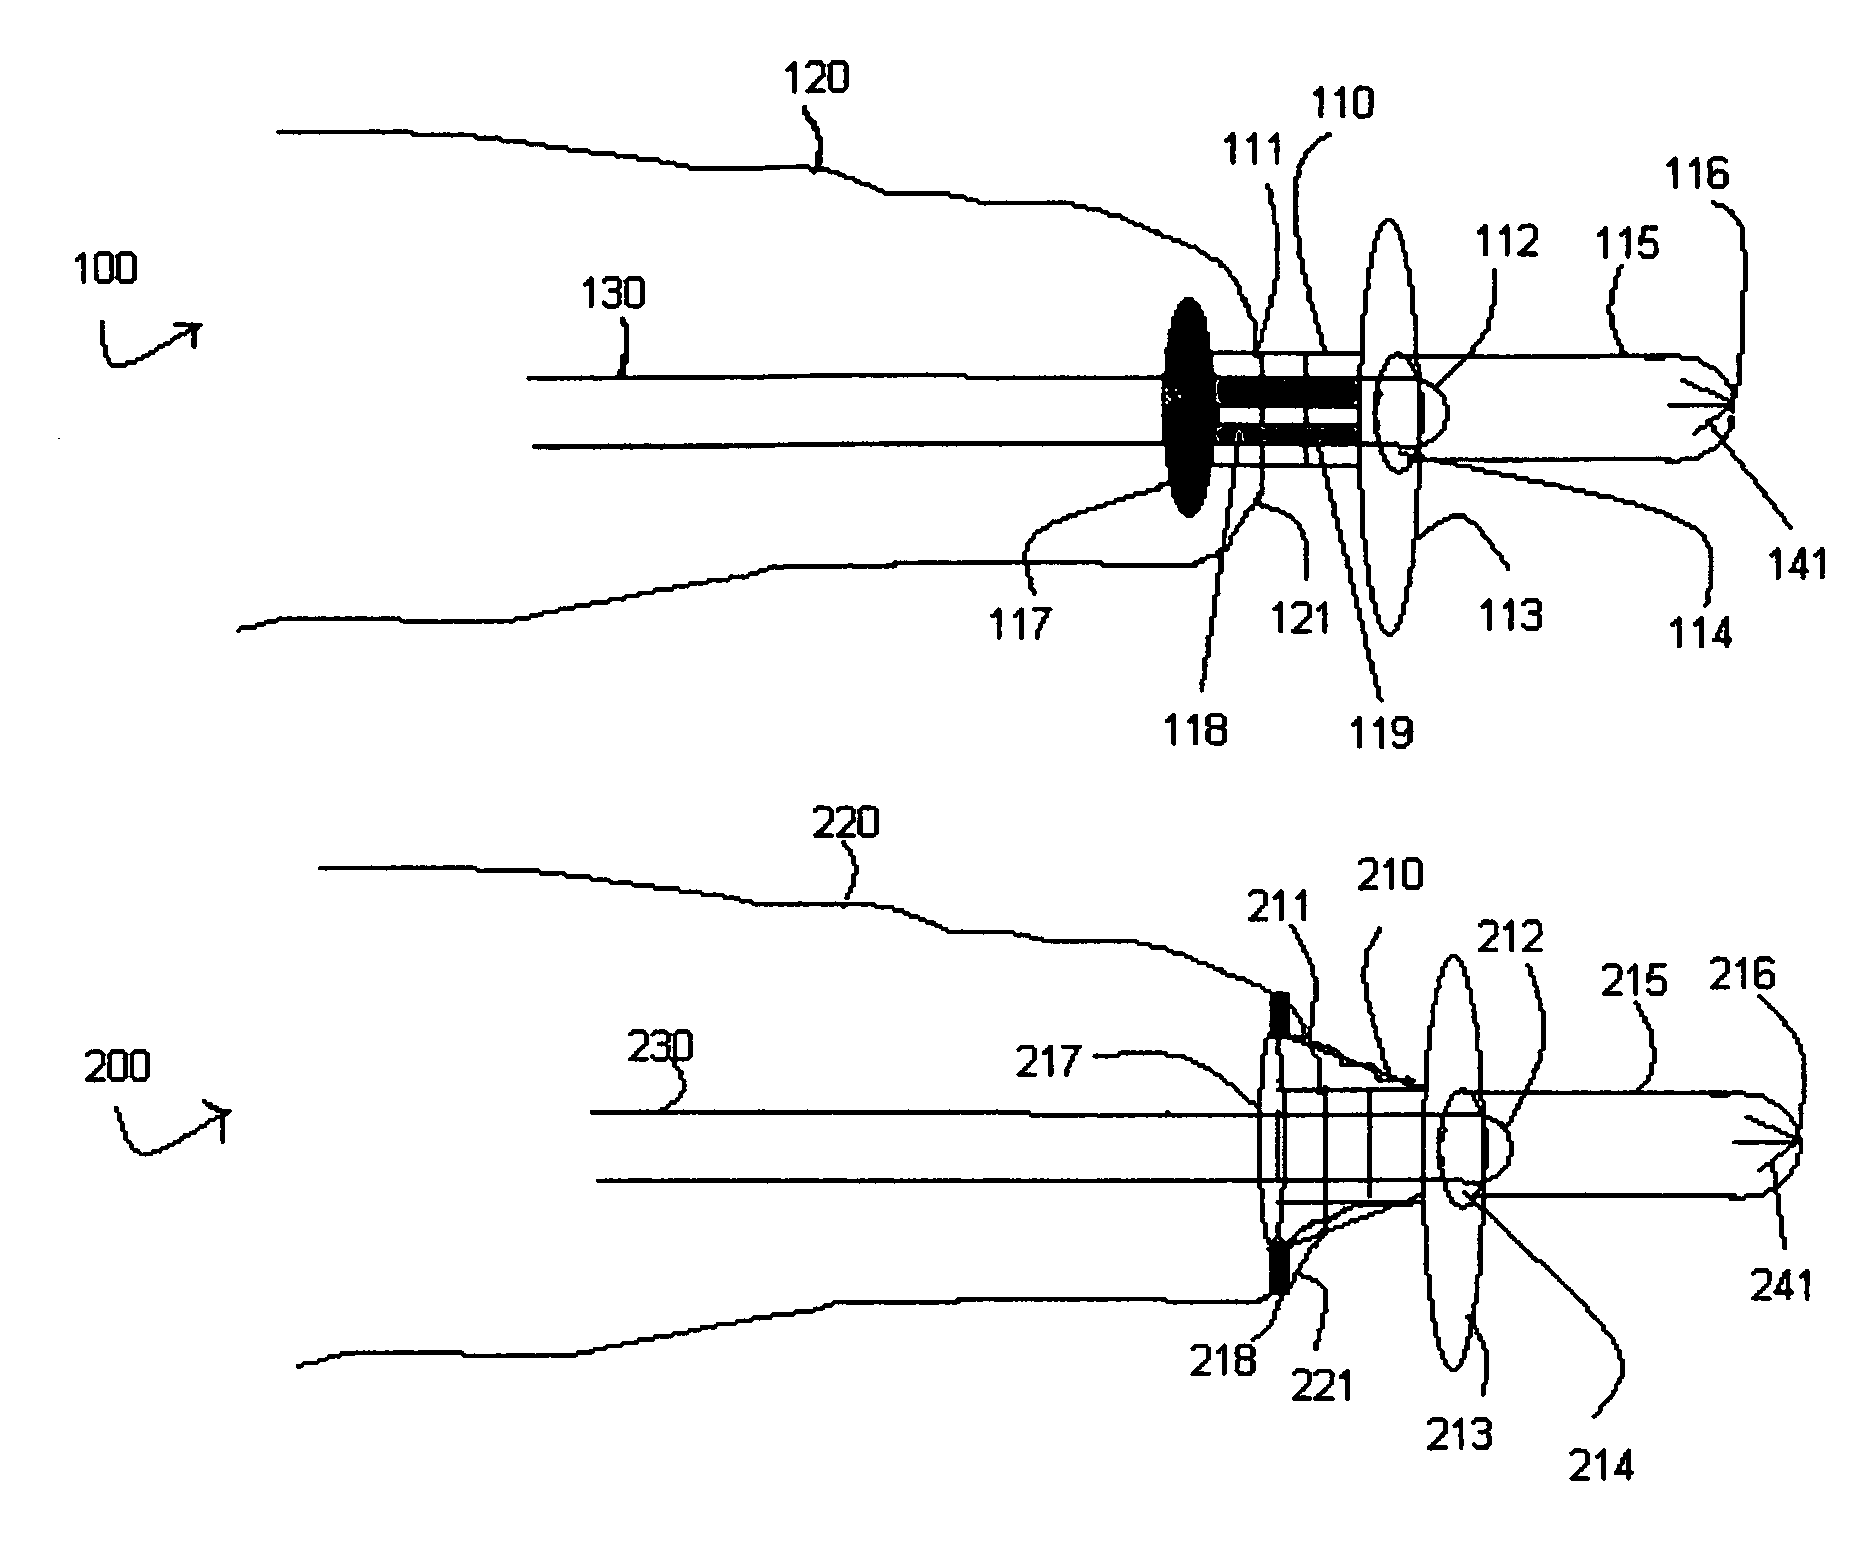 Devices for handling catheter assembly